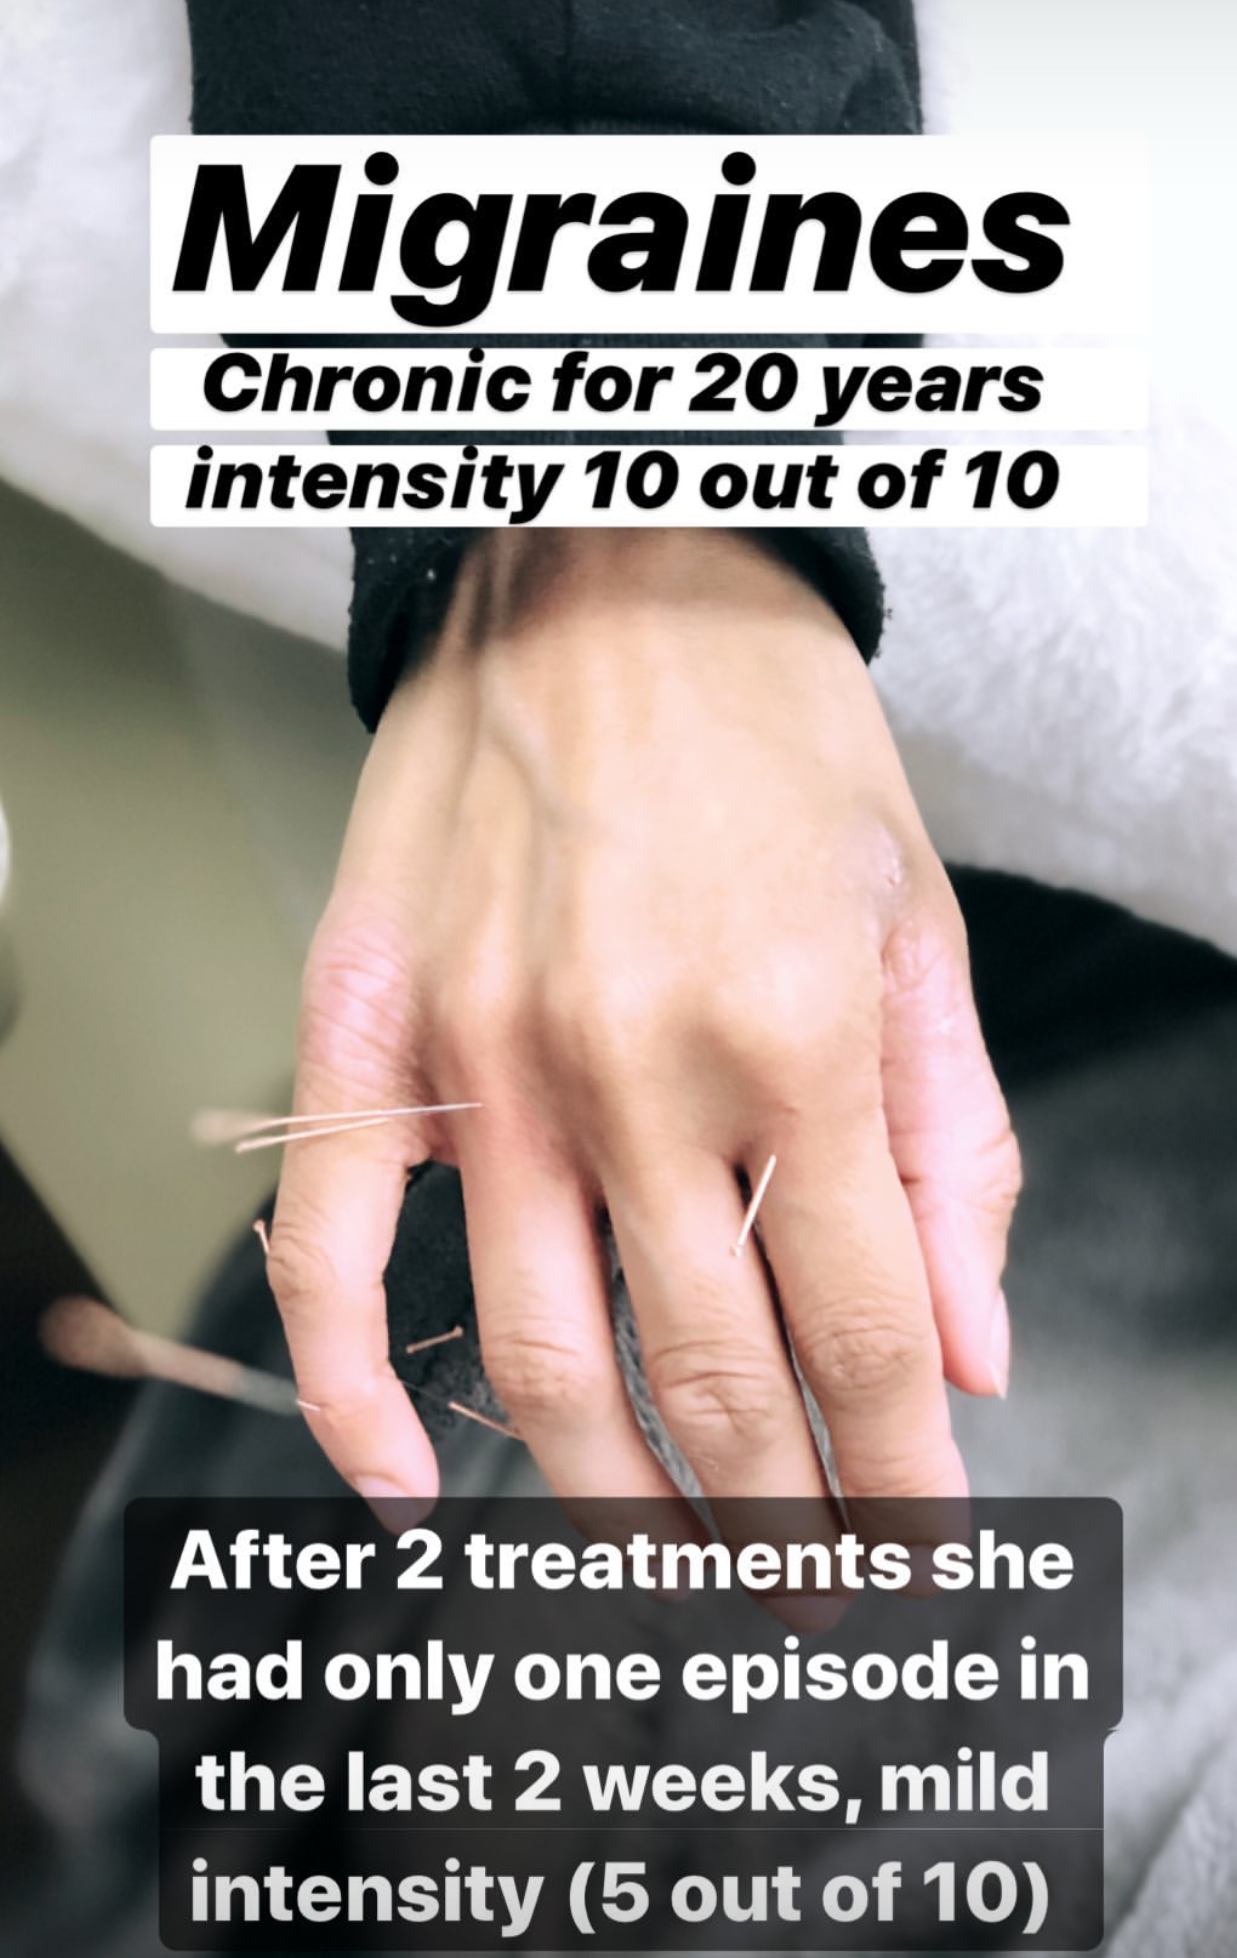  SuJok acupuncture in Vancouver used as treatment for Migraines. Patient received treatment for chronic migraines for 10 years. After 2 treatments, she had reduced pain intensity and reduced episodes.  